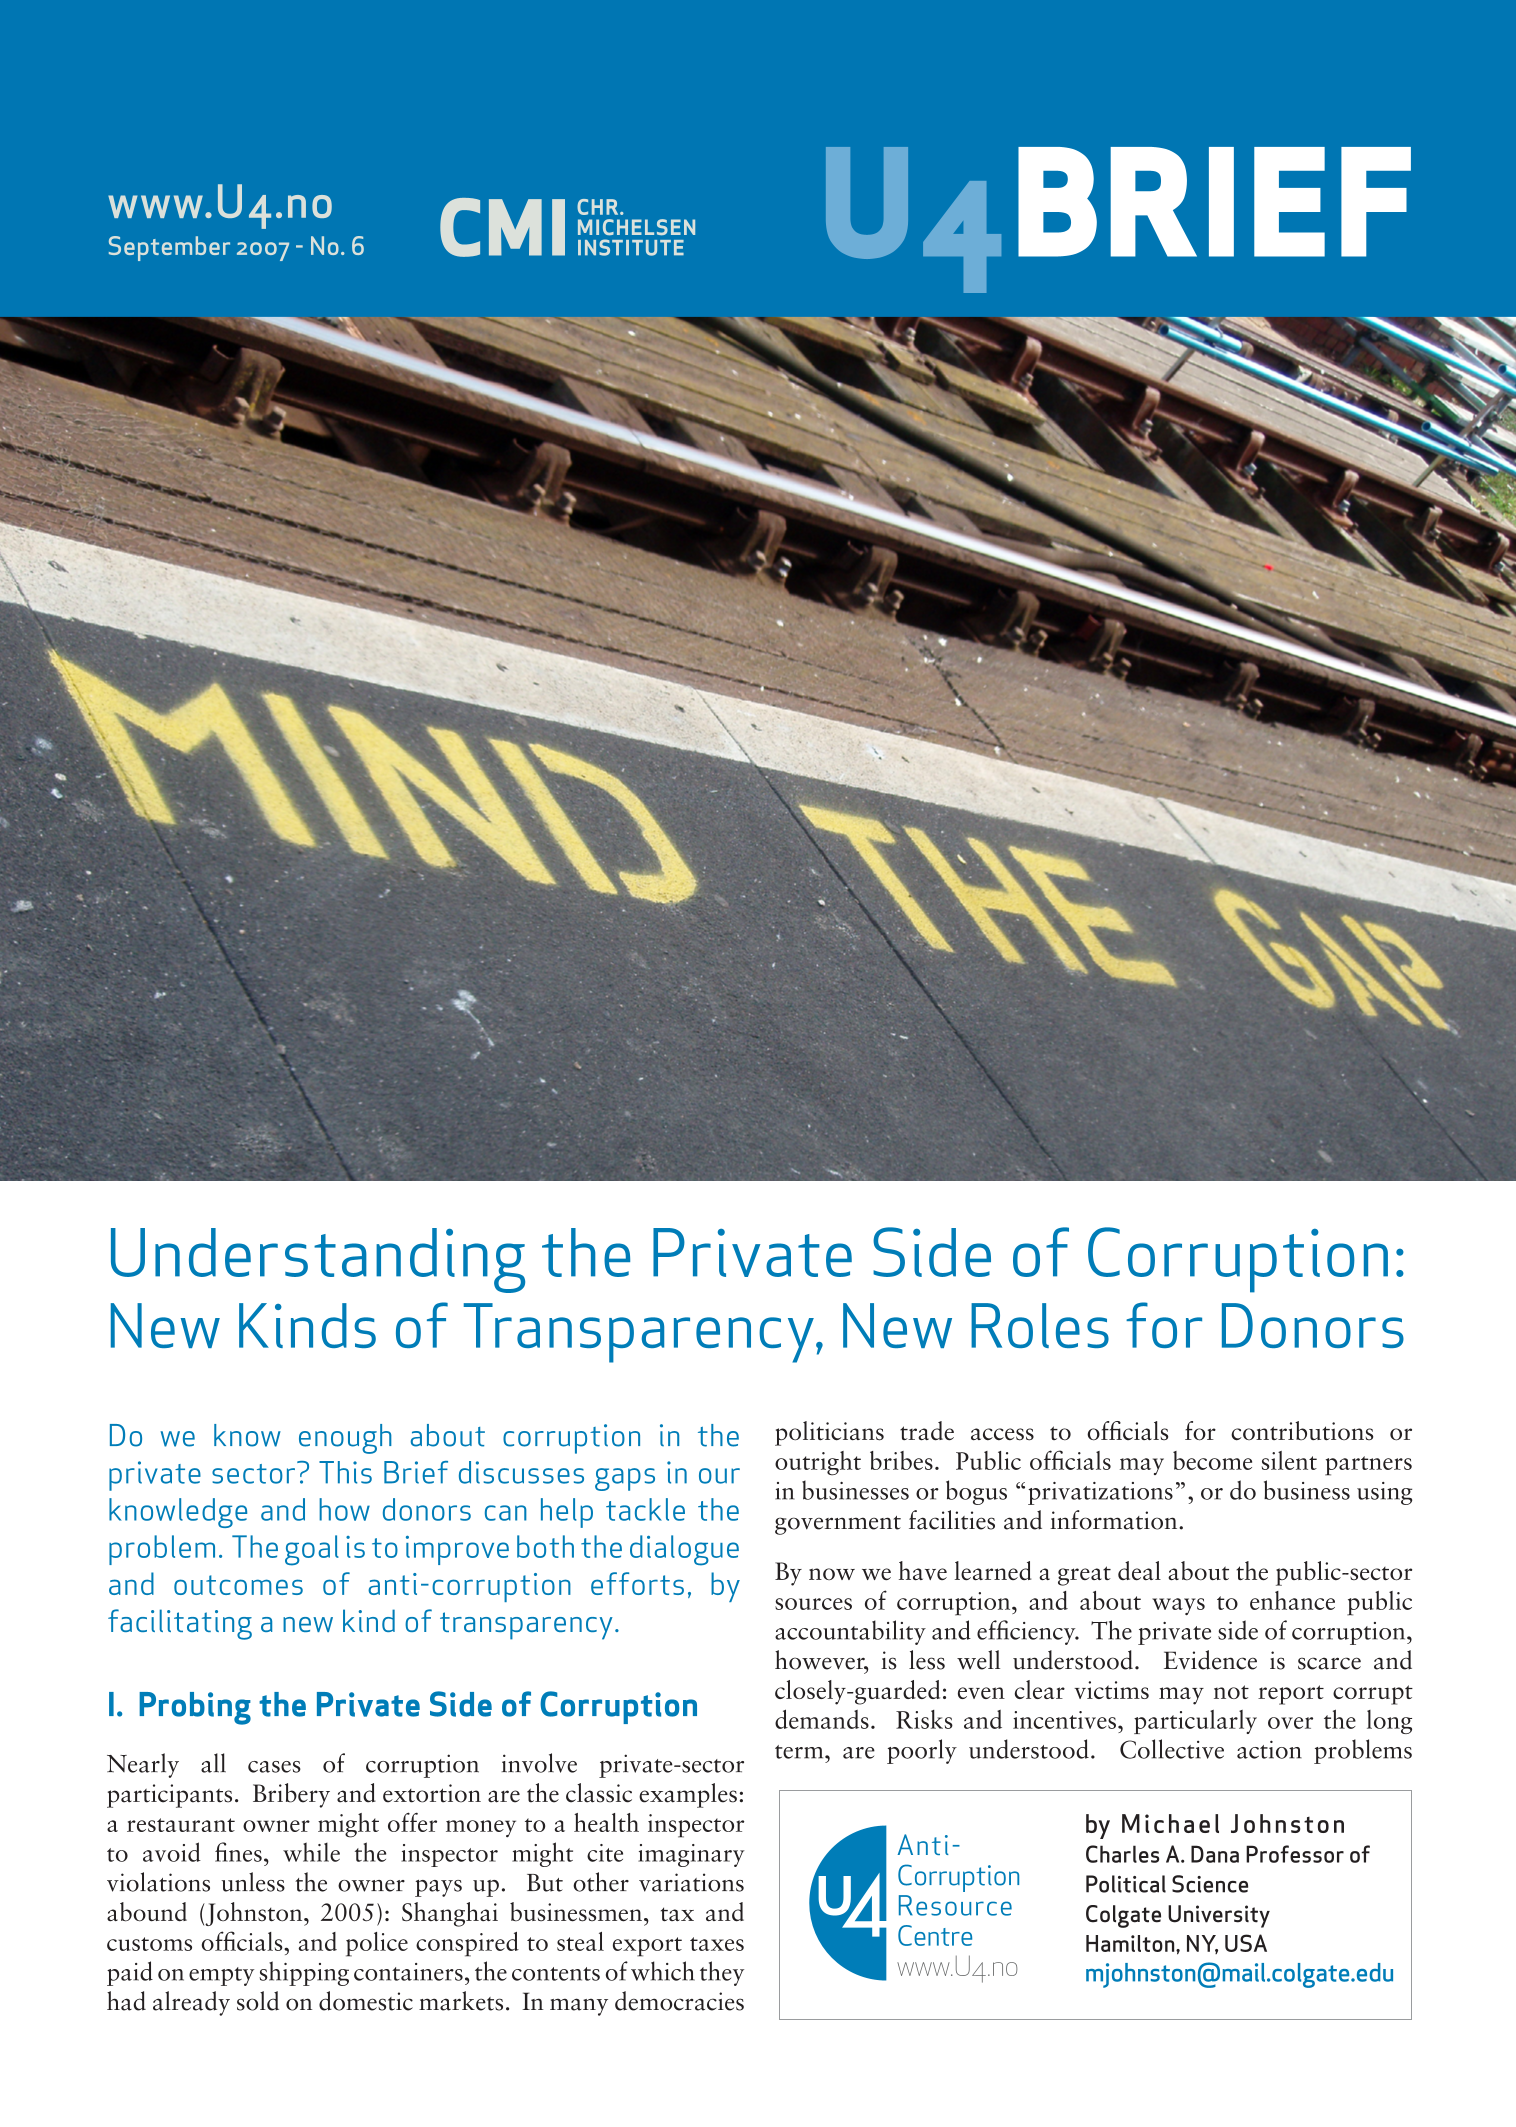 Understanding the private side of corruption: New kinds of transparency, new rules for donors